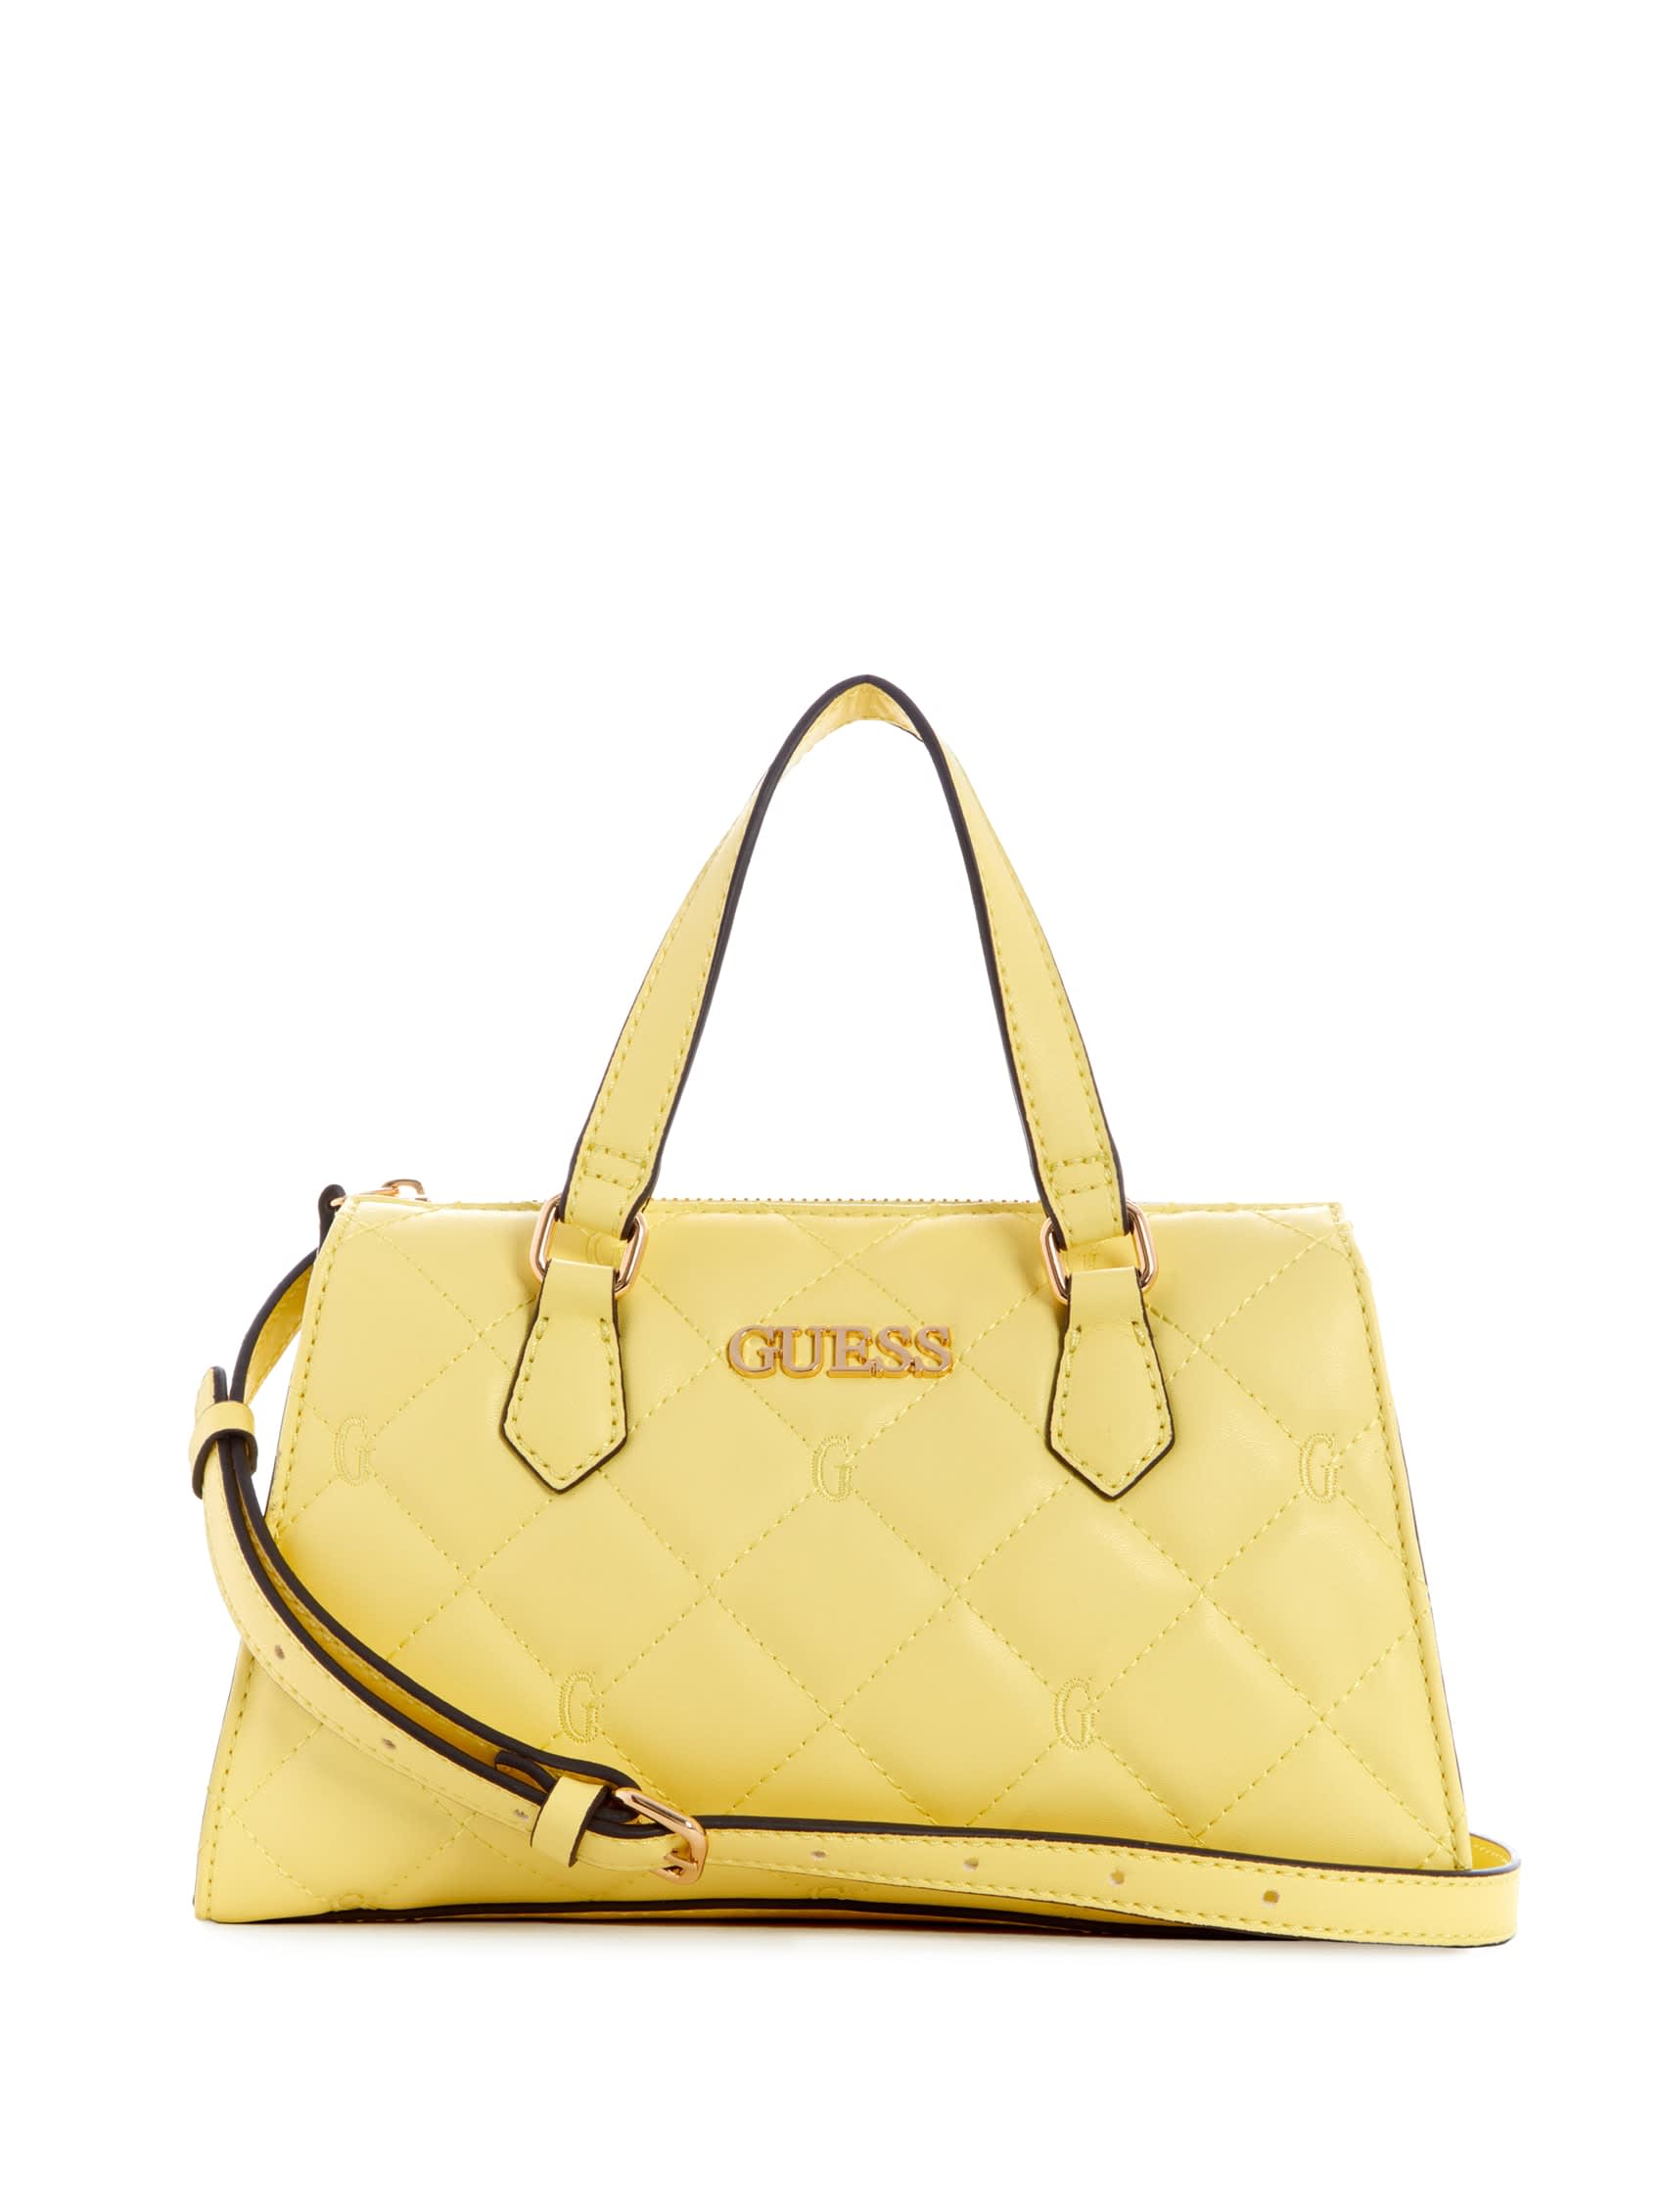 Waterston Quilted Small Satchel